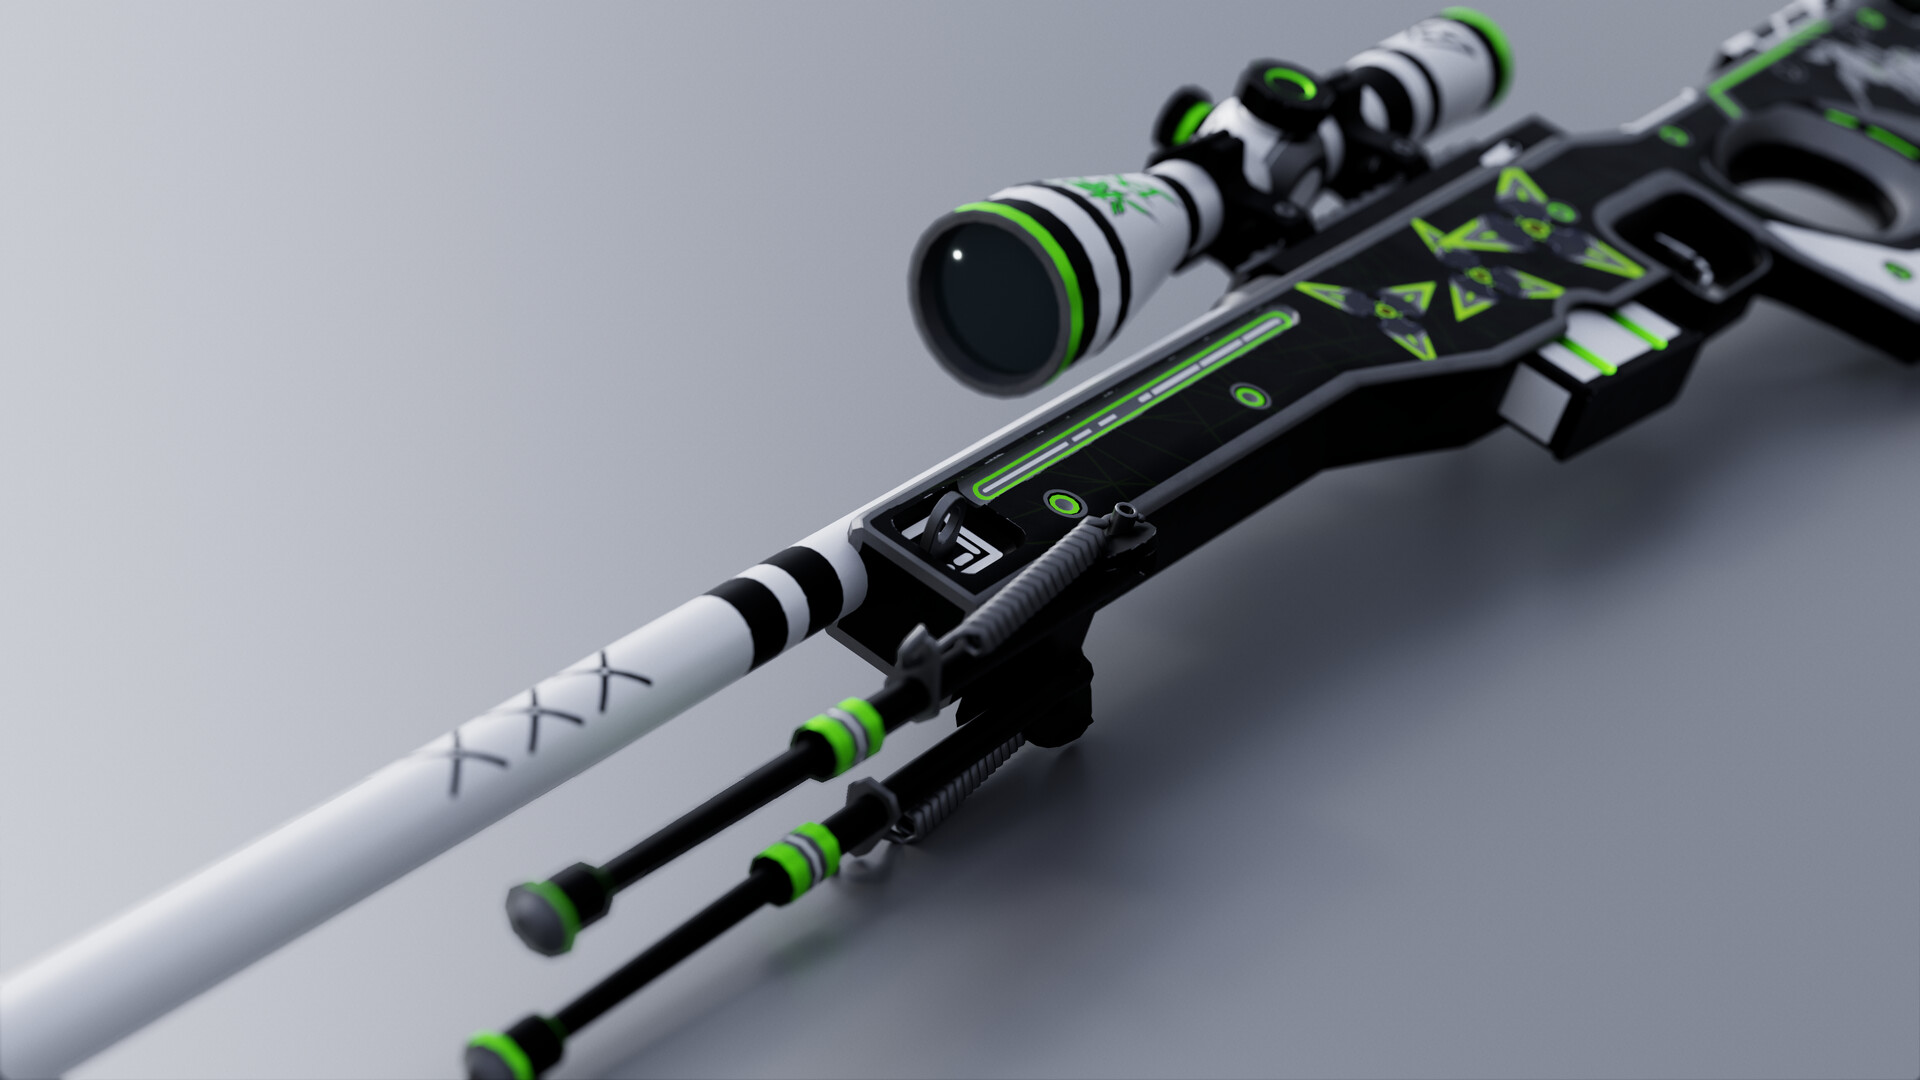 AWP Atheris wallpaper created by A.S.H